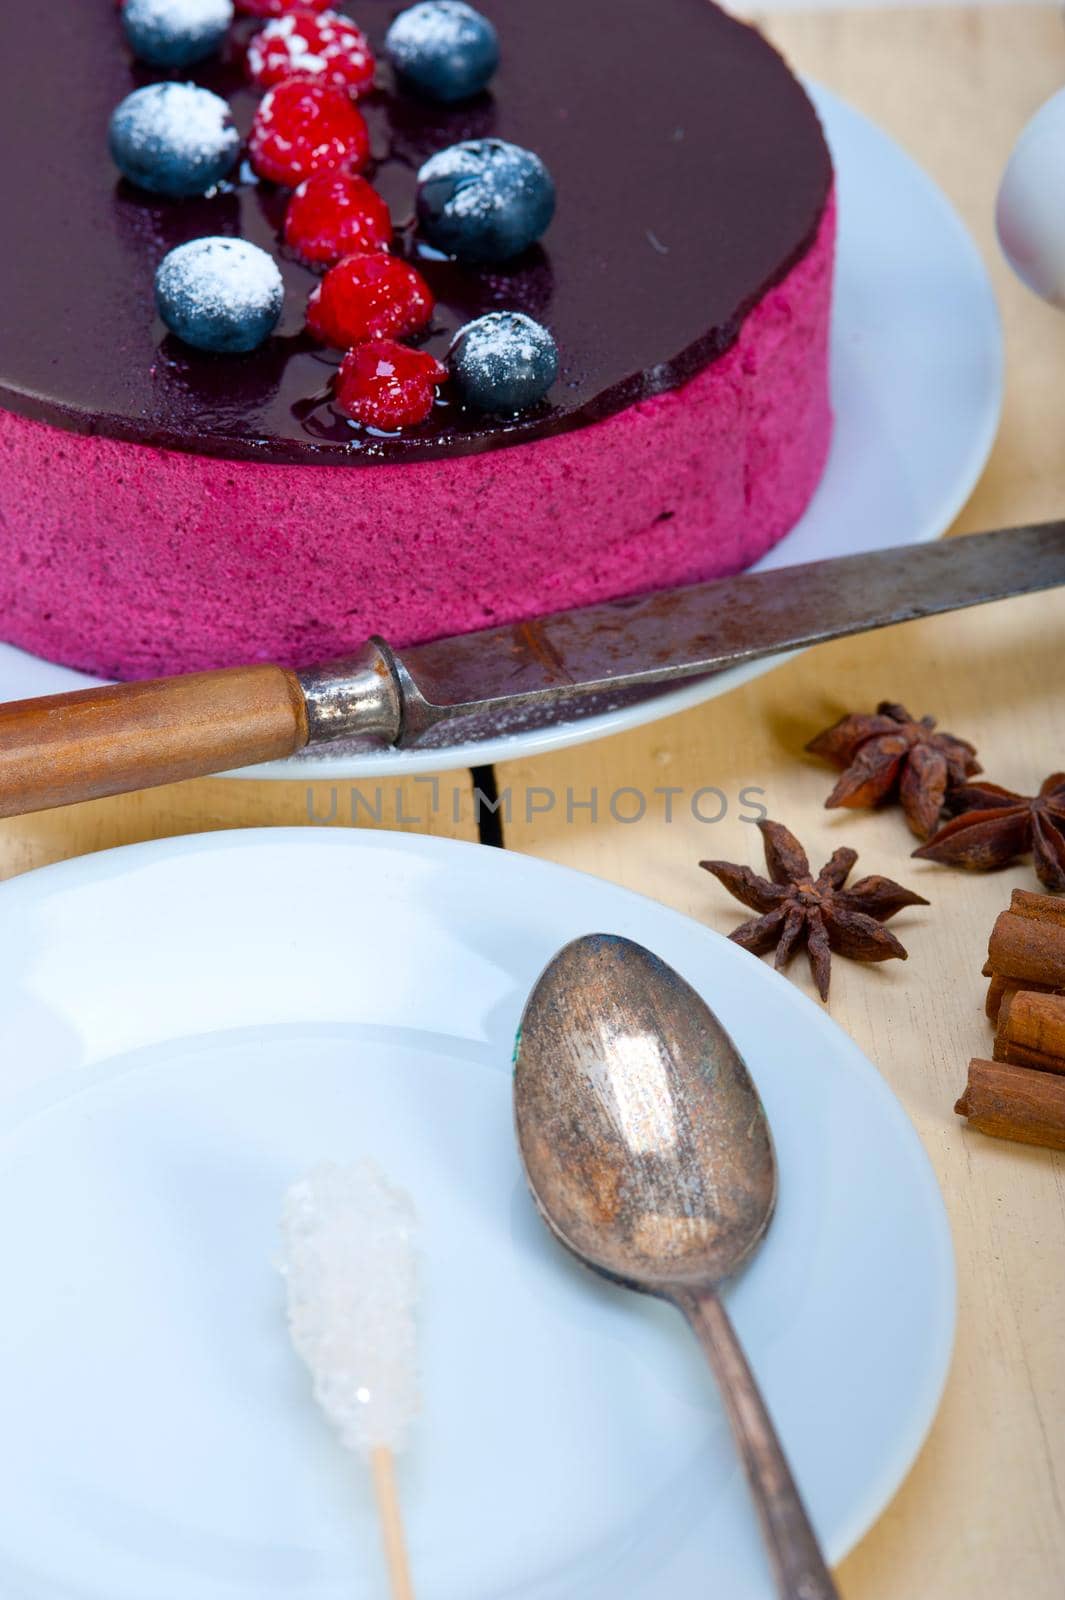 blueberry and raspberry cake mousse dessert by keko64